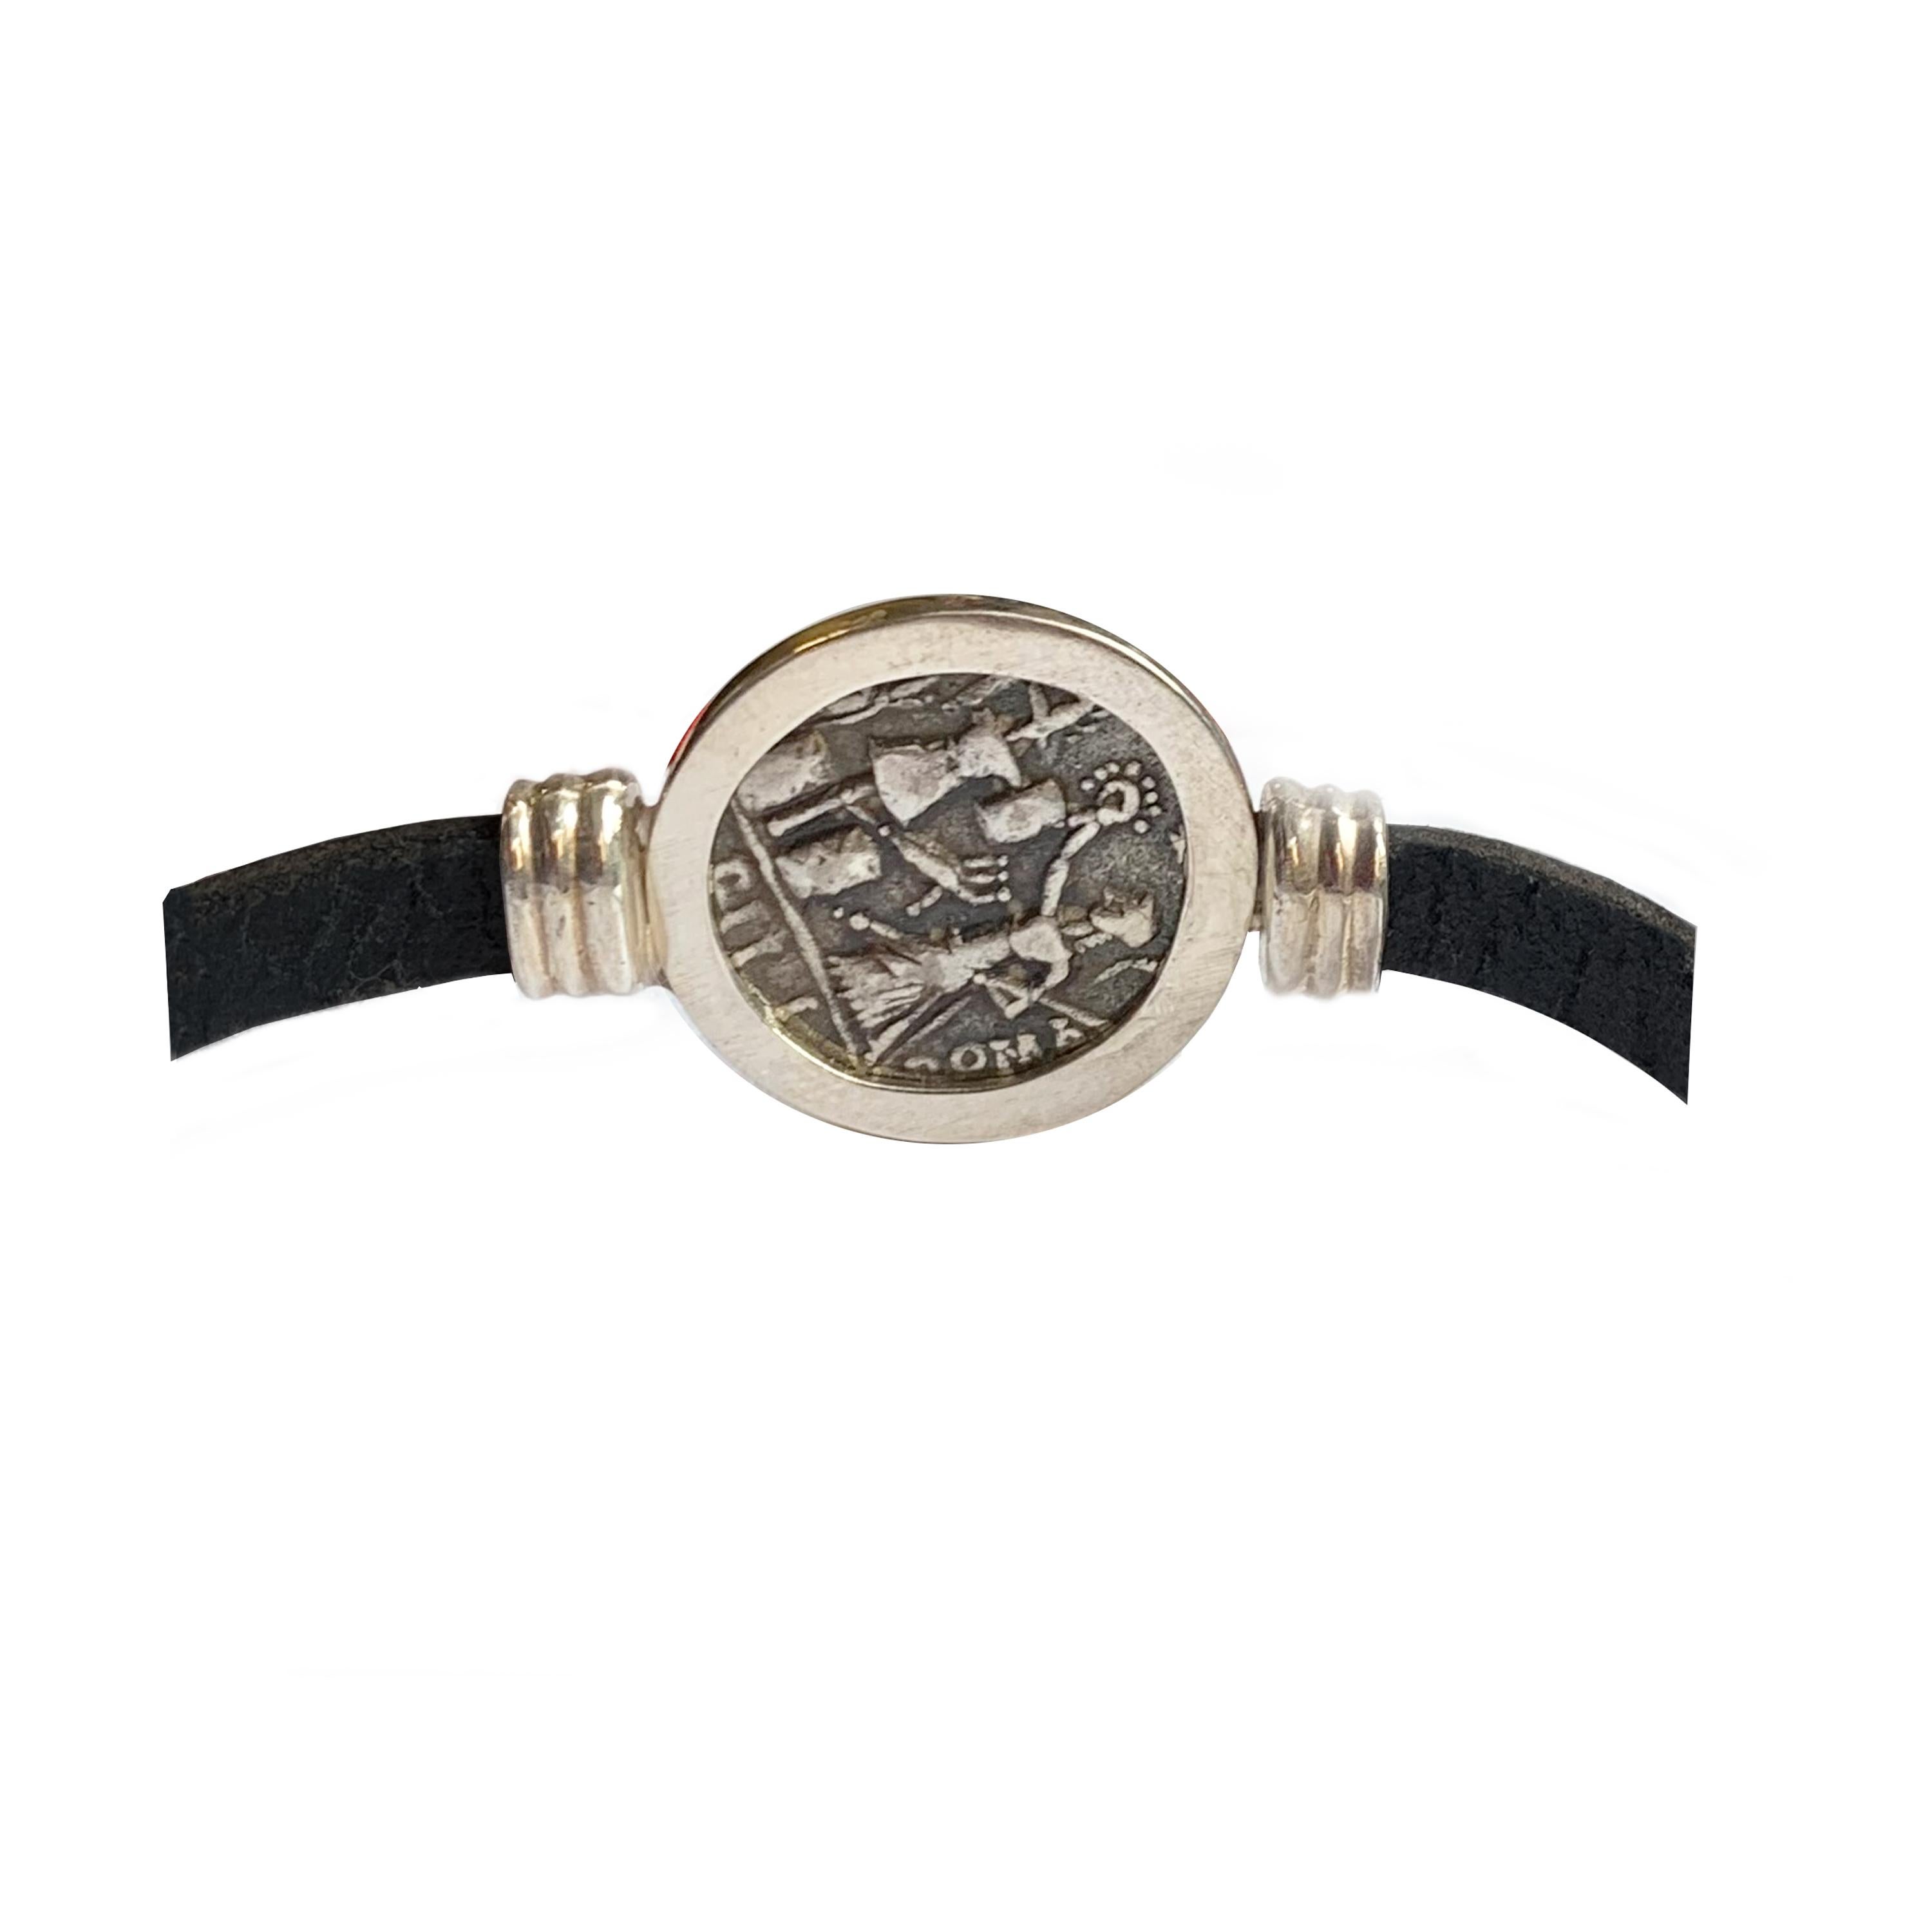 In this sterling silver and leather bracelet, an authentic Roman coin from the 2nd century BC has been set, depicting the two-faced God Janus.
In ancient Roman religion and myth, Janus pronounced is the god of beginnings, gates, transitions, time,